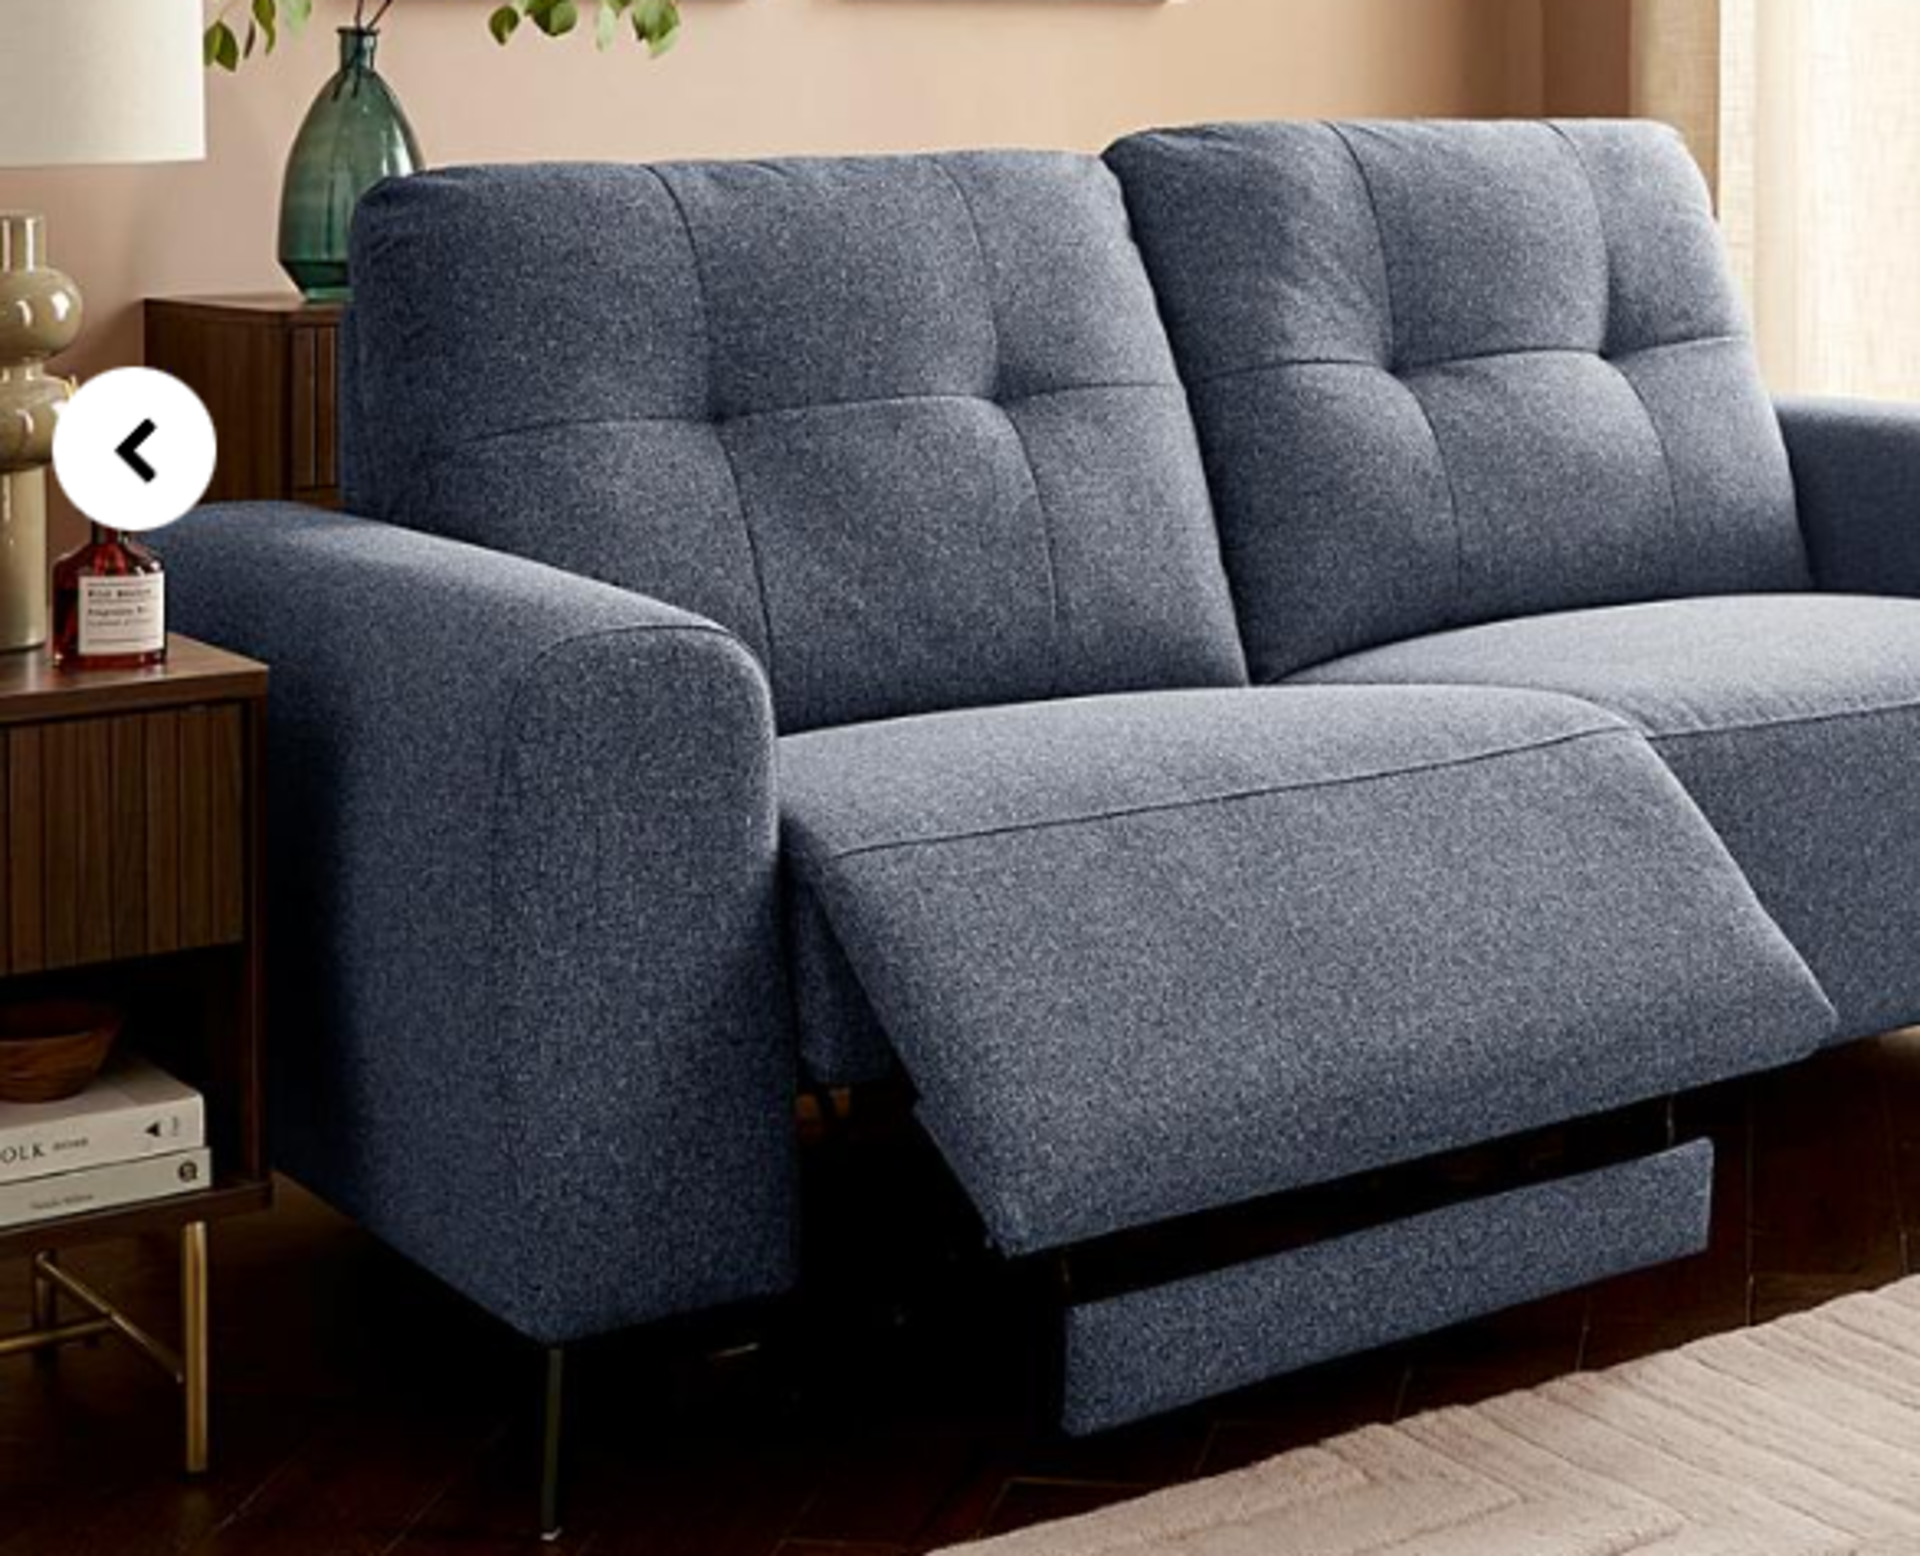 Gray and Osbourn No.166 Electric Recliner 3 Seater Sofa. - ER28. RRP £1,299.00. Part of the Gray & - Image 2 of 2